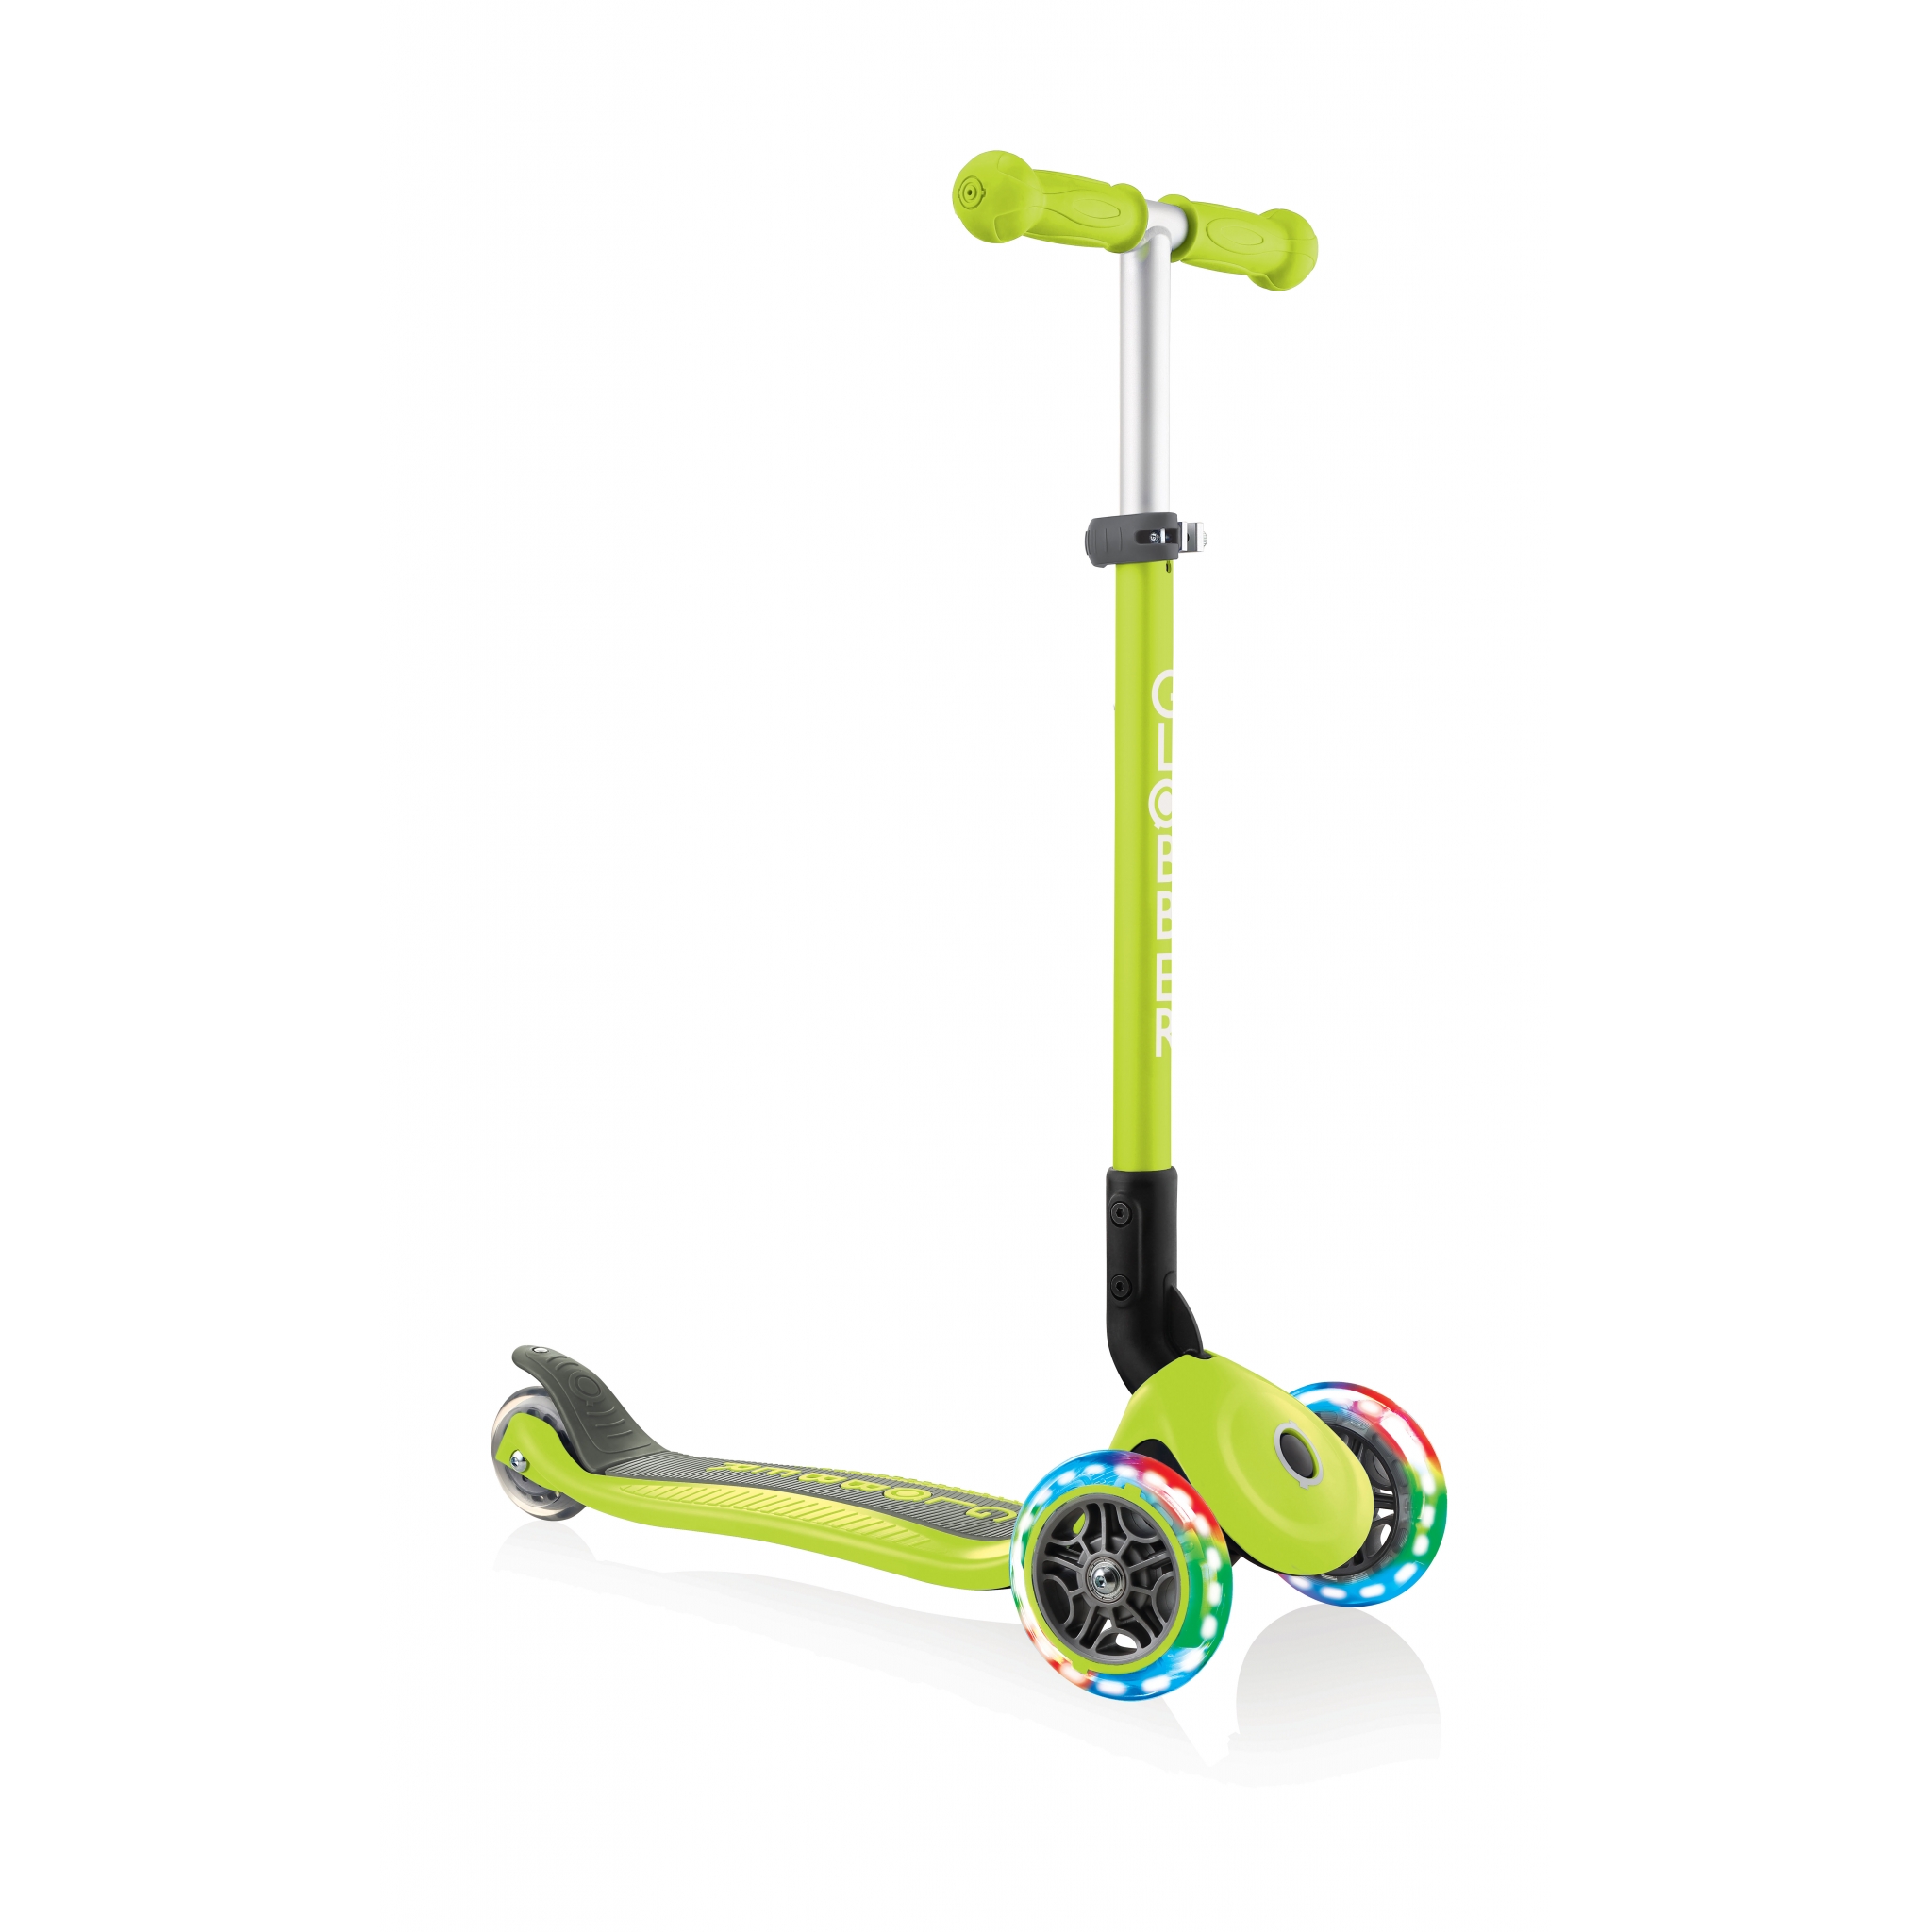 PRIMO-FOLDABLE-LIGHTS-3-wheel-foldable-scooter-light-up-scooter-for-kids-lime-green 4